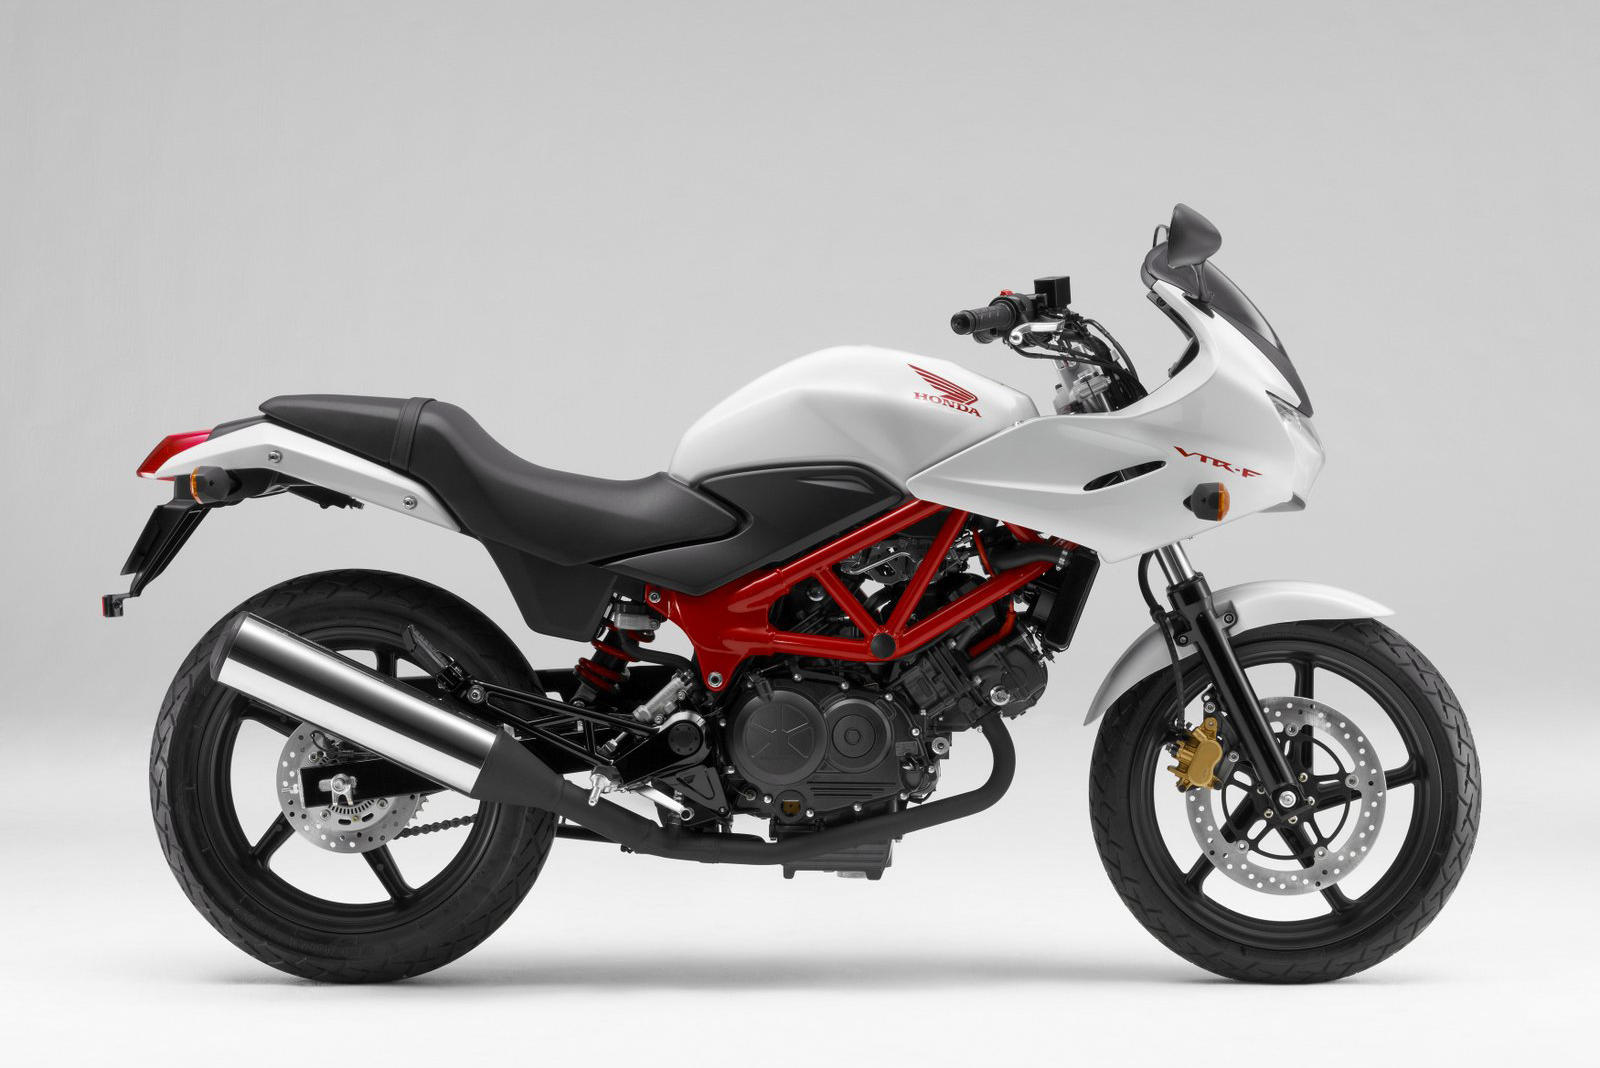 VTR250F launched in Japan